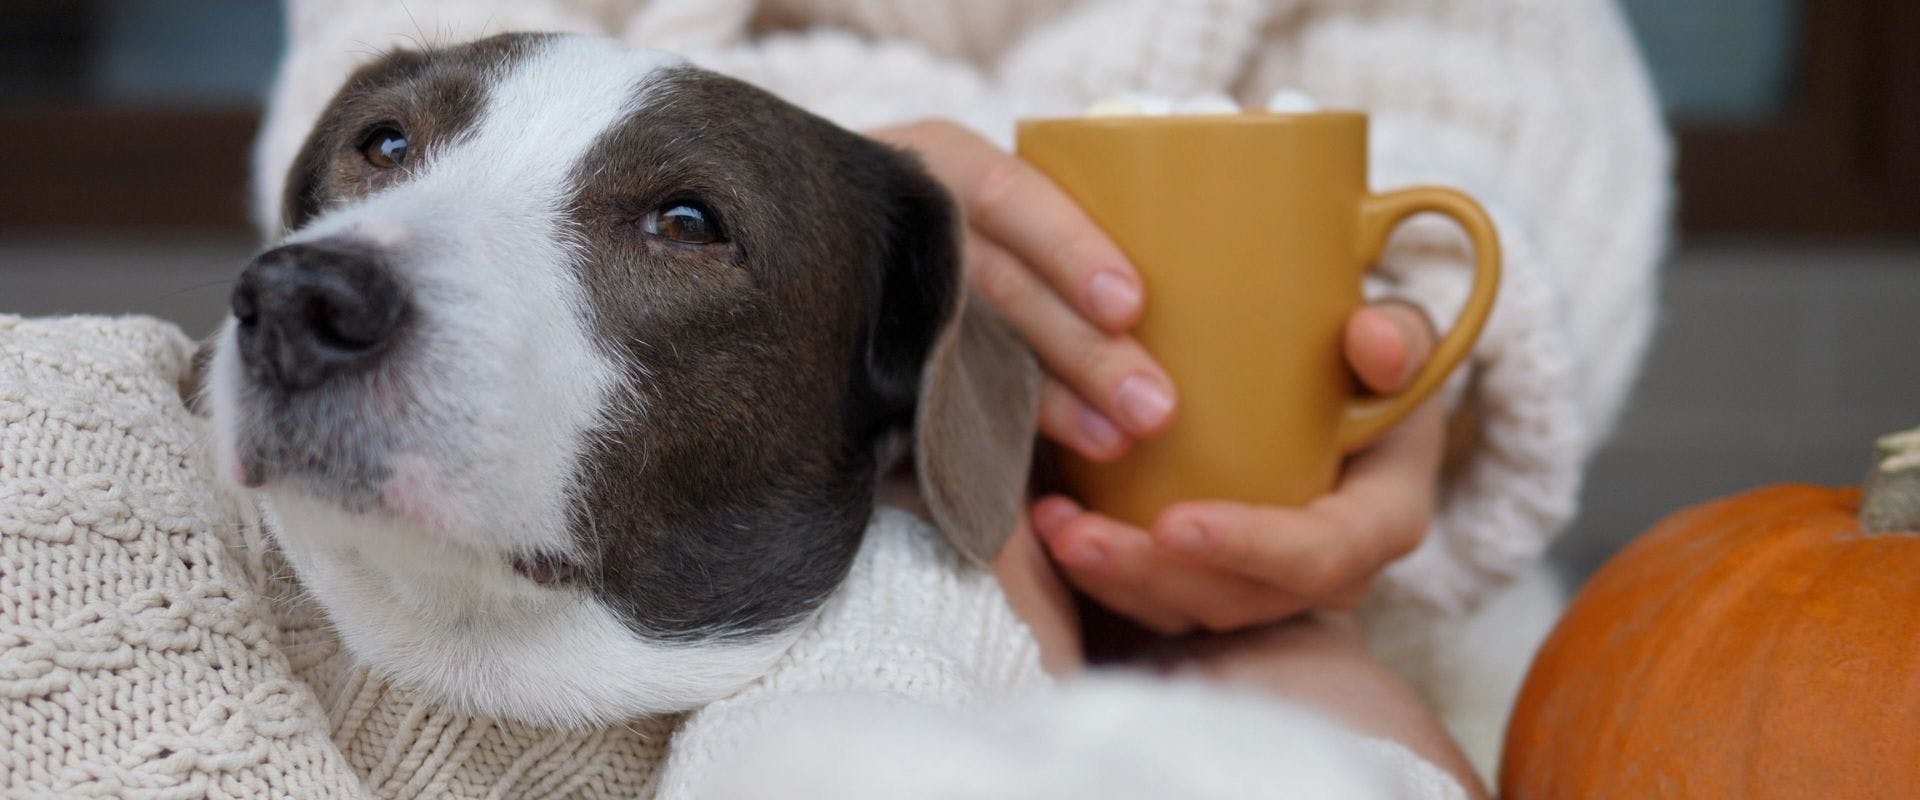 Grey and white dog sat with person drinking a pumpkin spice latte